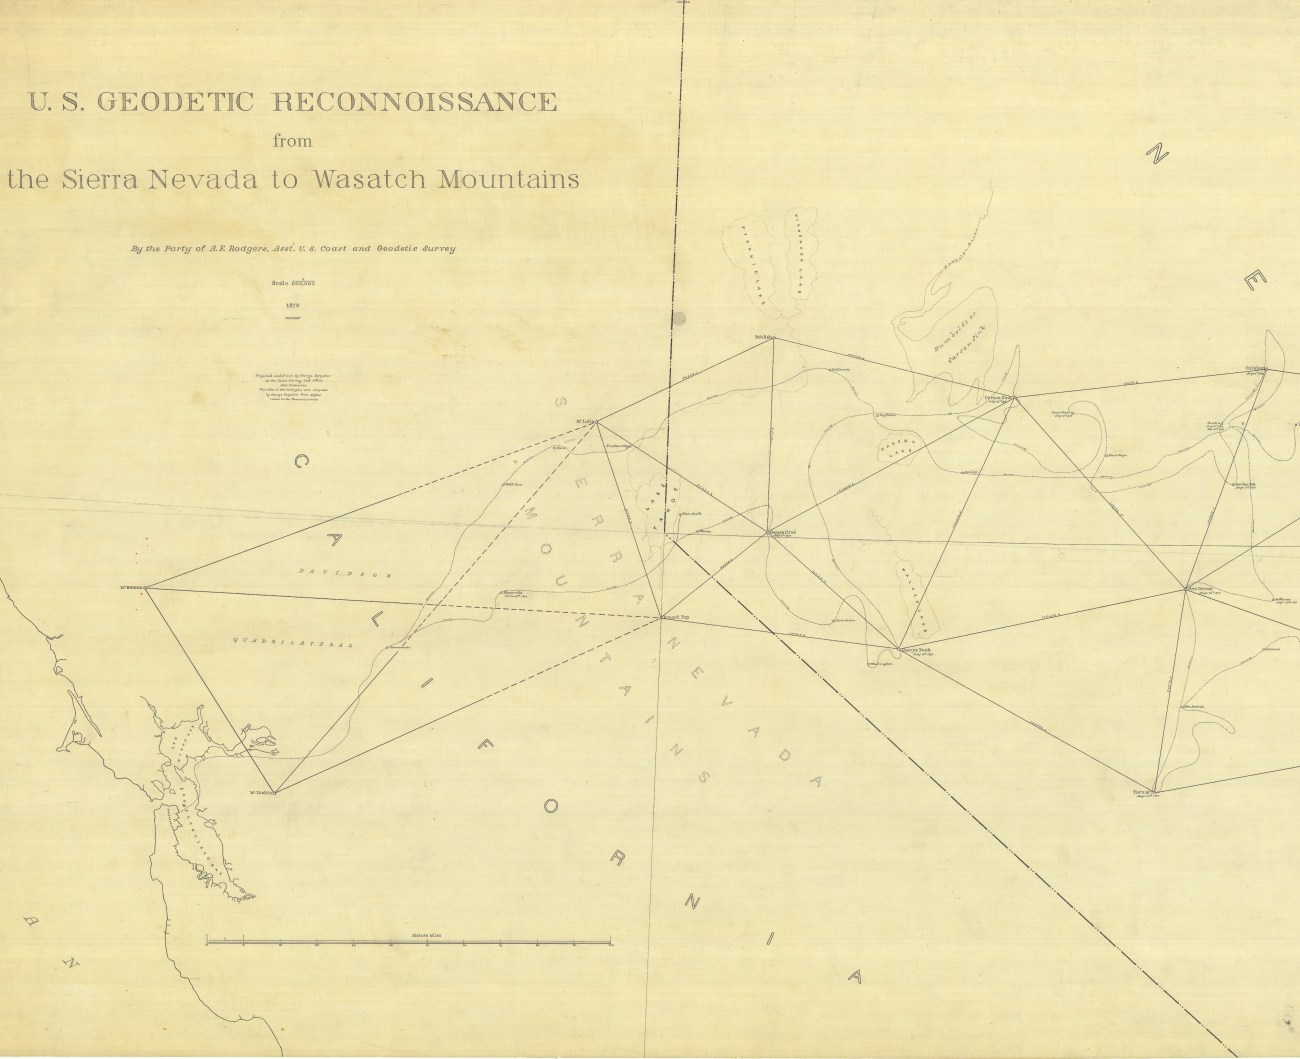 W section of Geodetic Reconnaissance from the Sierra Nevada to WasatchMountains